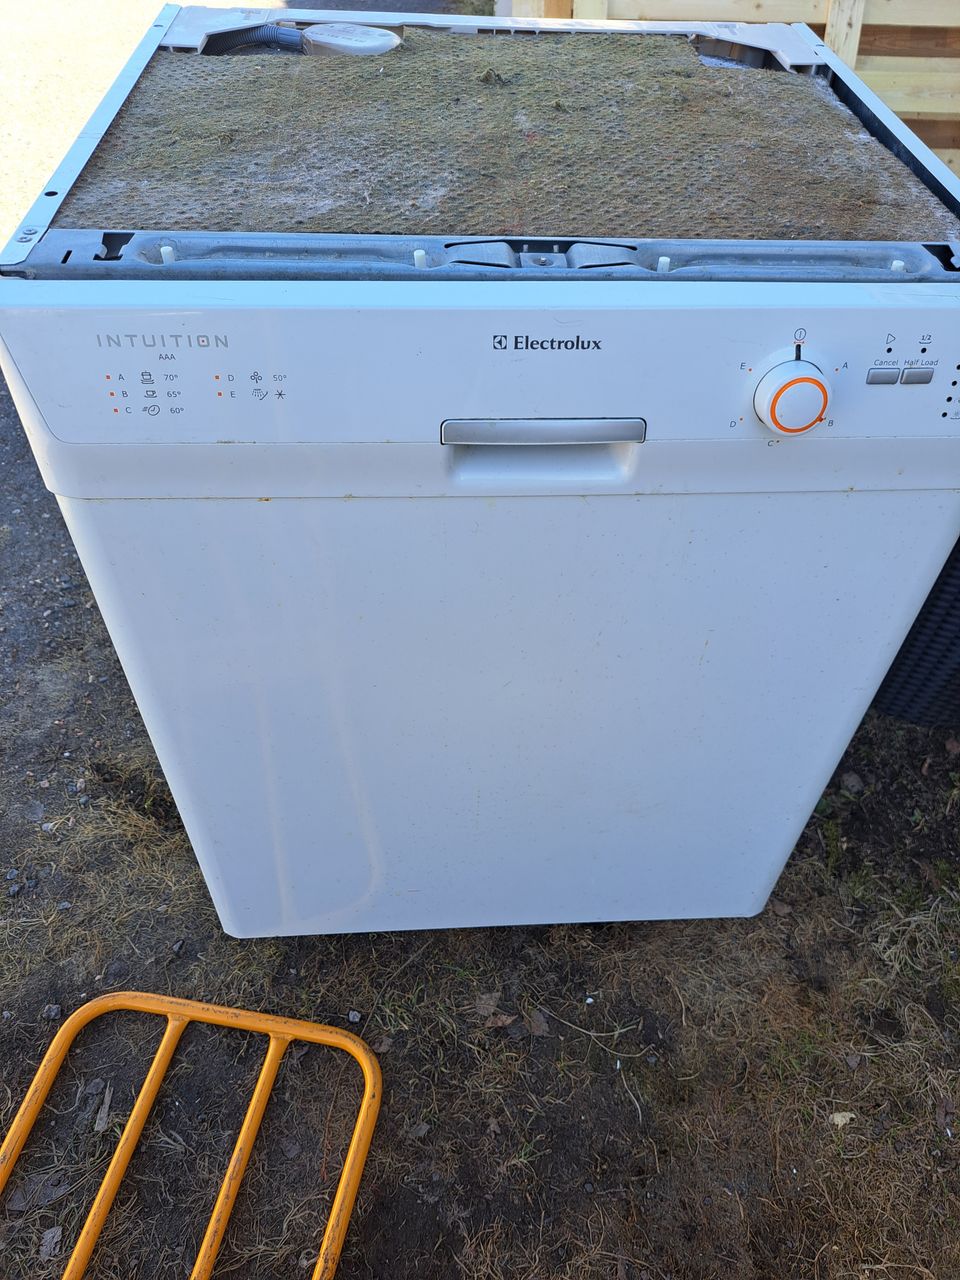 Electrolux Intuition astianpesukone